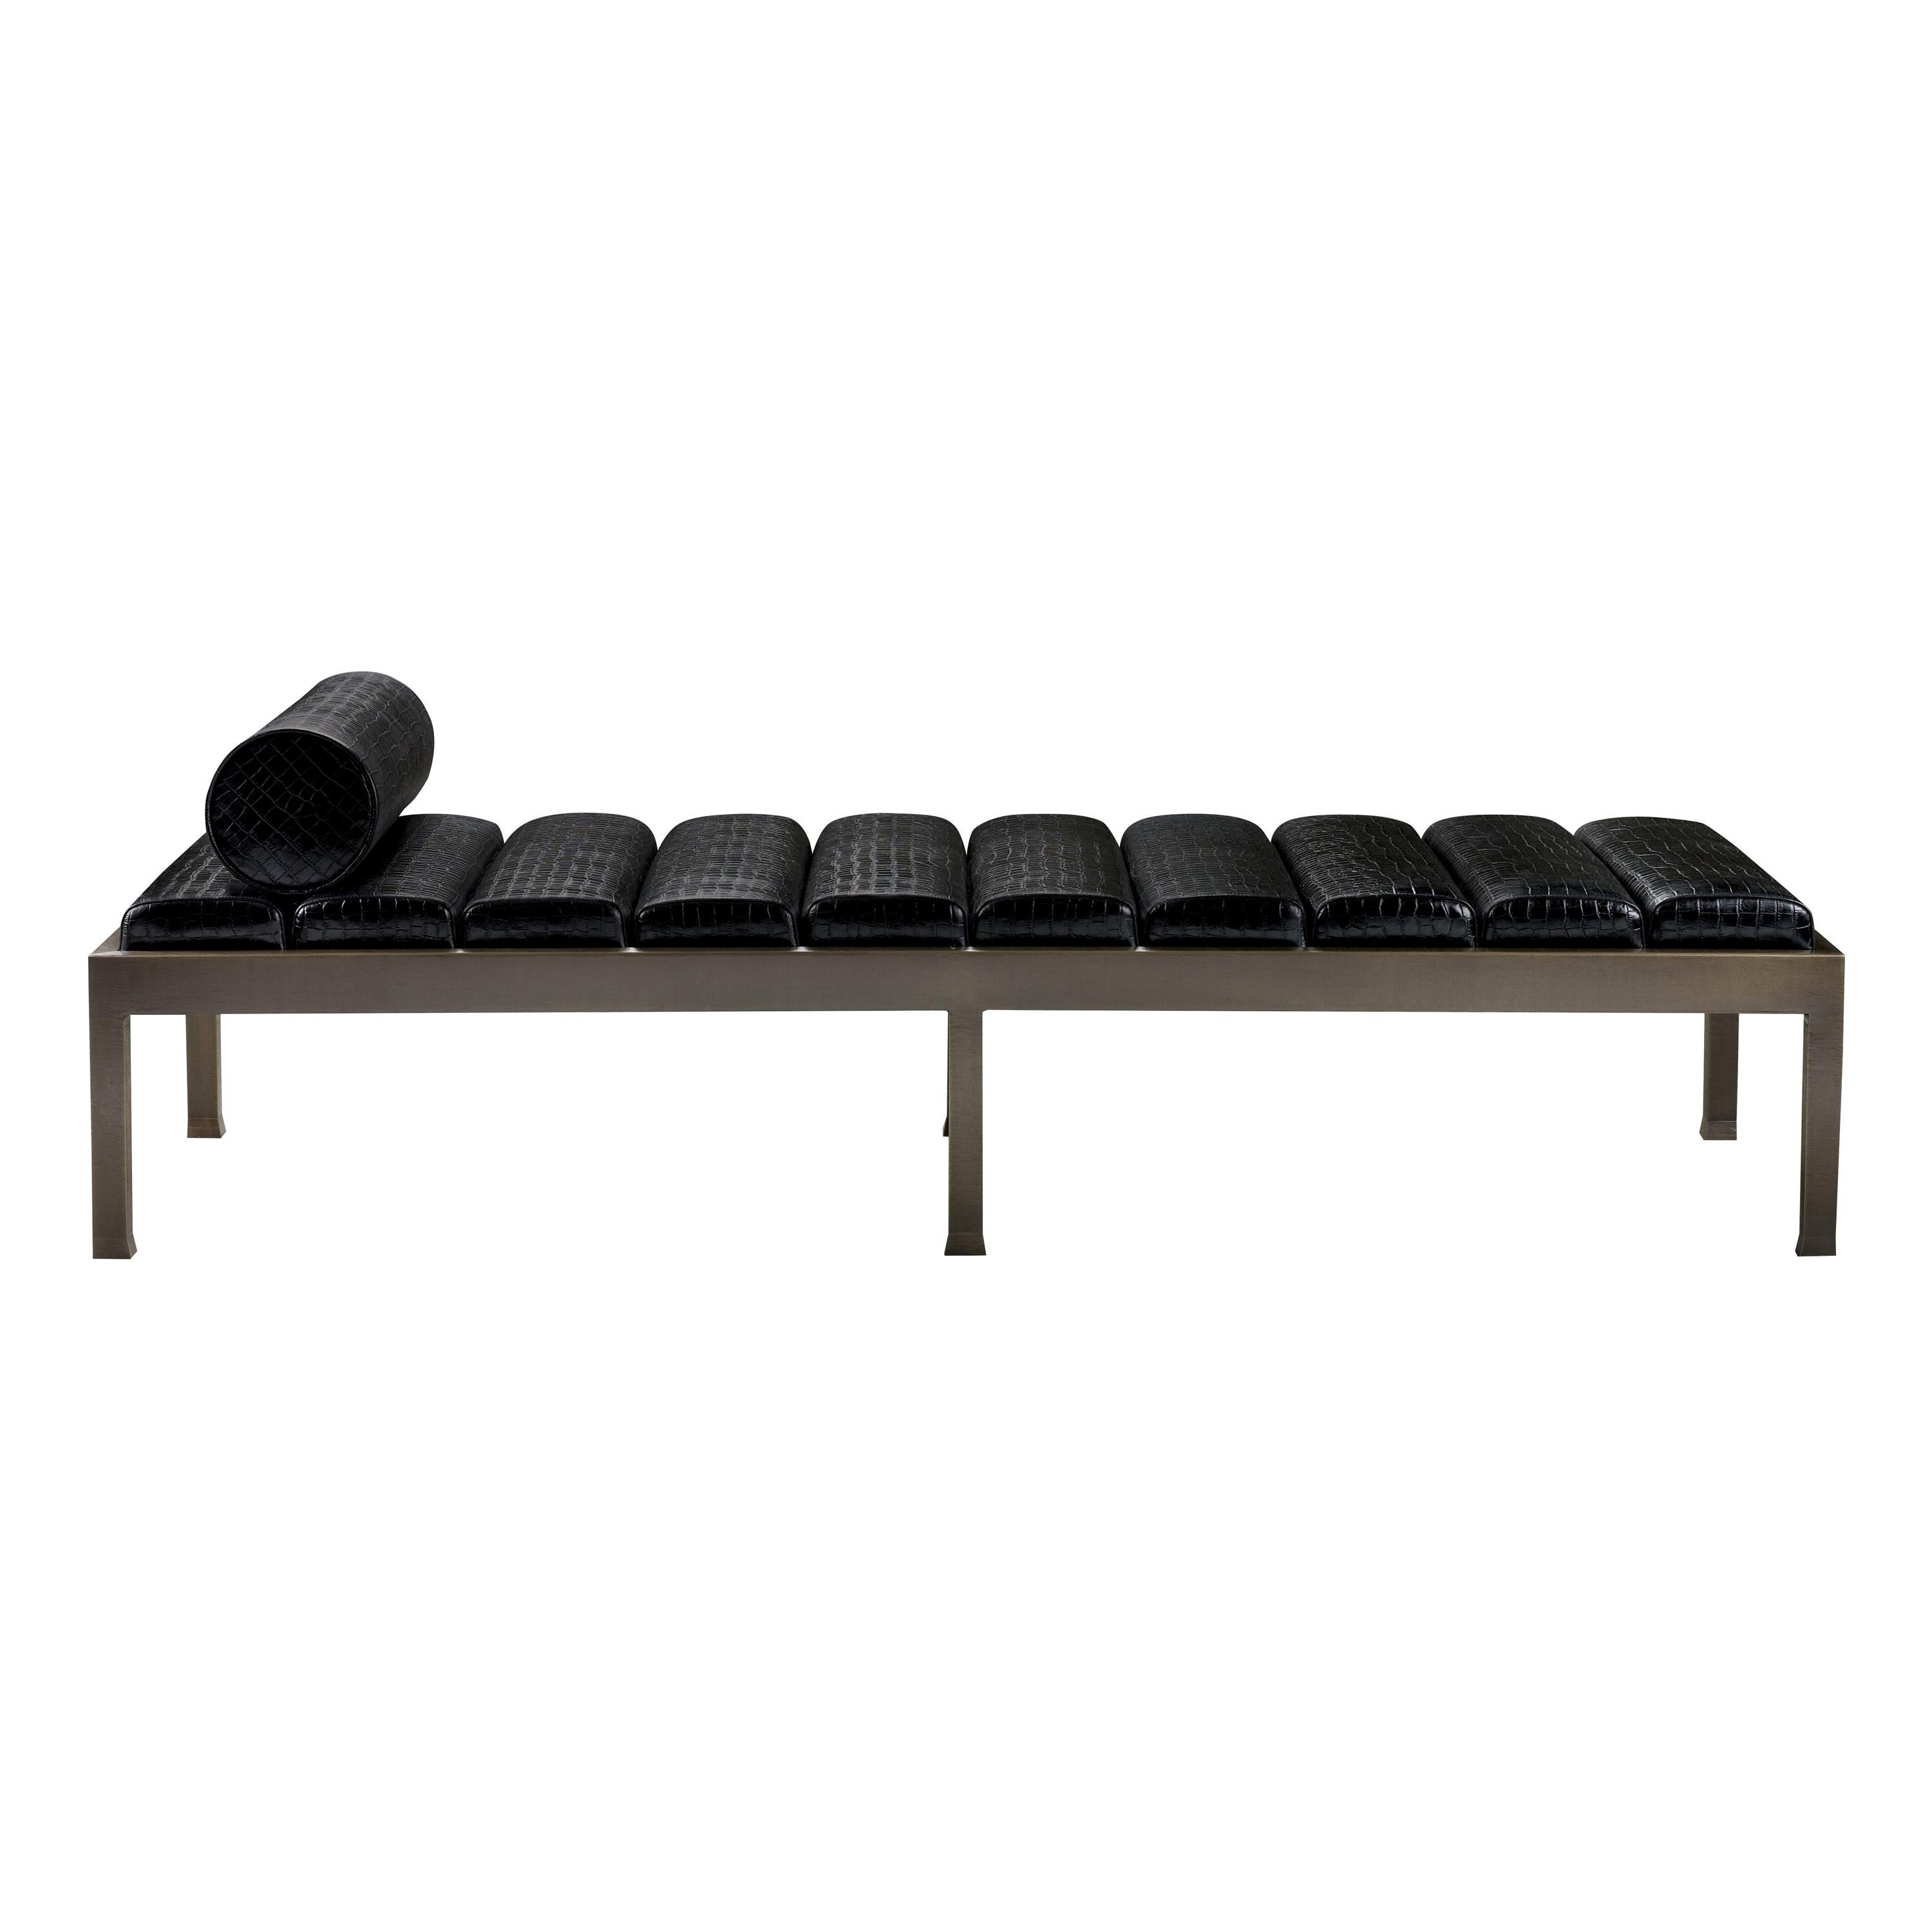 Promemoria Gong Daybed in Hammered Bronze and Black Leather by Romeo Sozzi For Sale